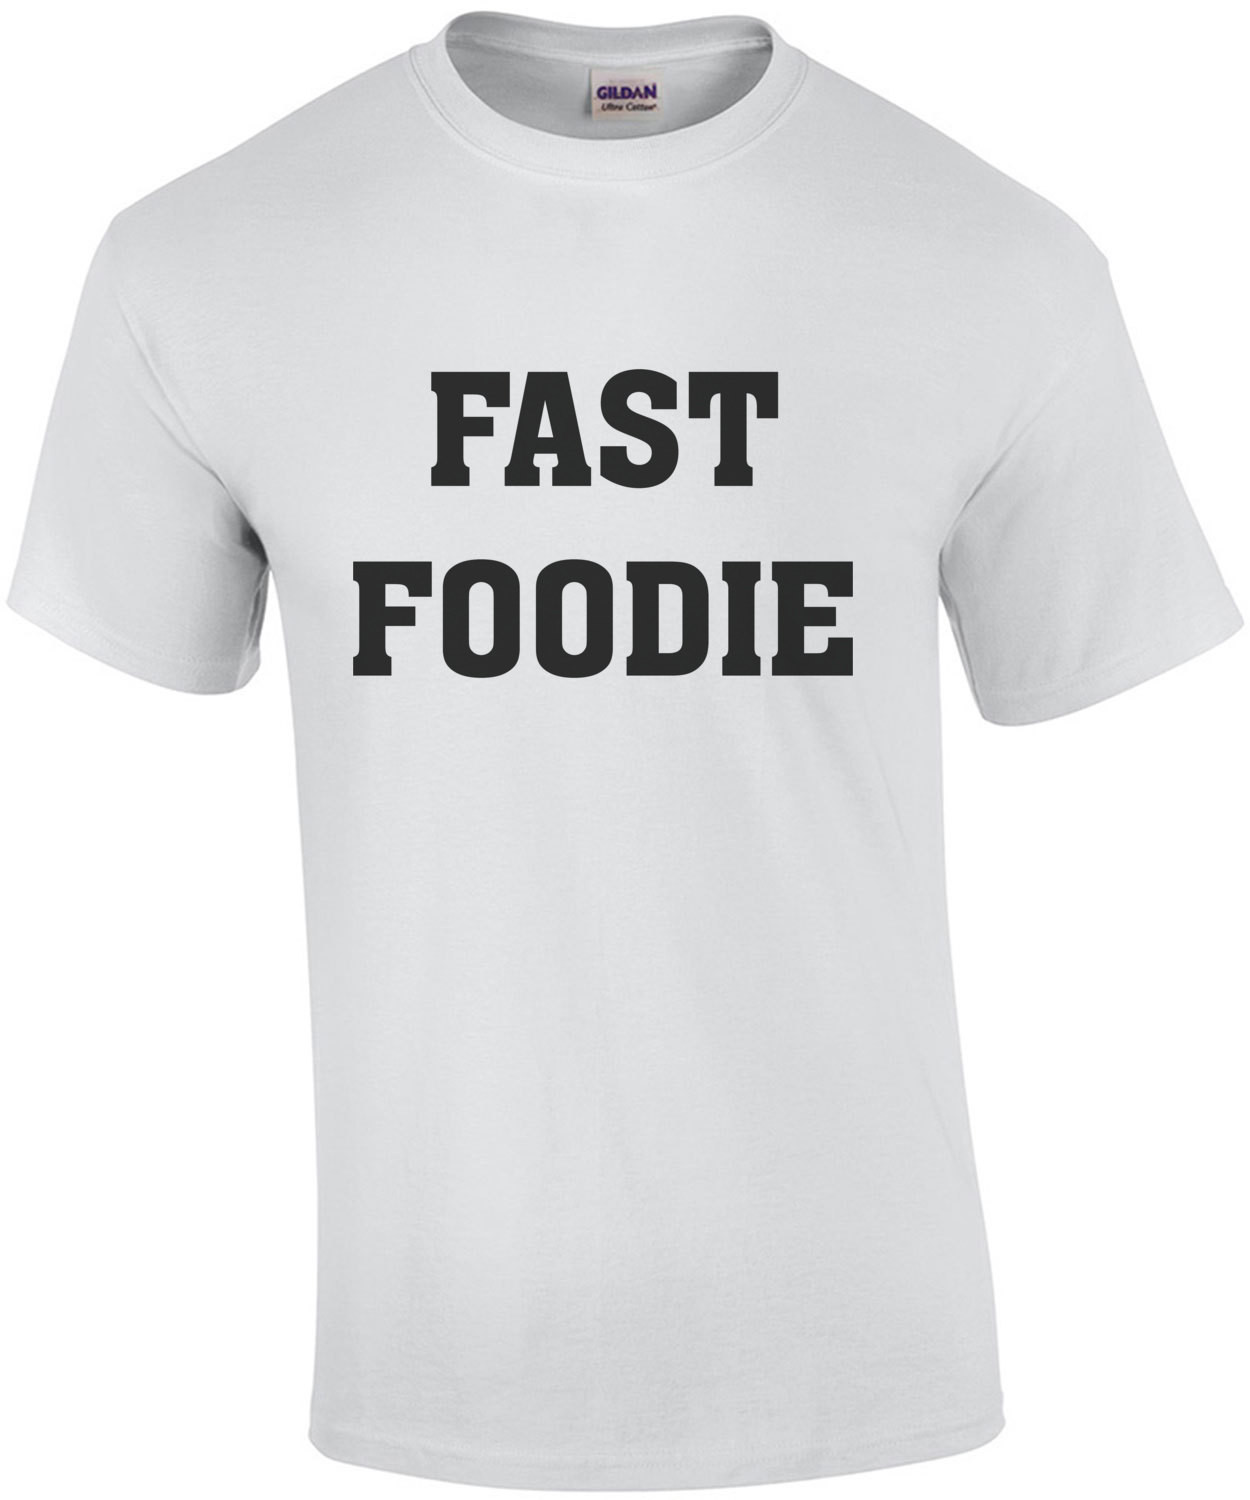 Fast Foodie - Funny food t-shirt